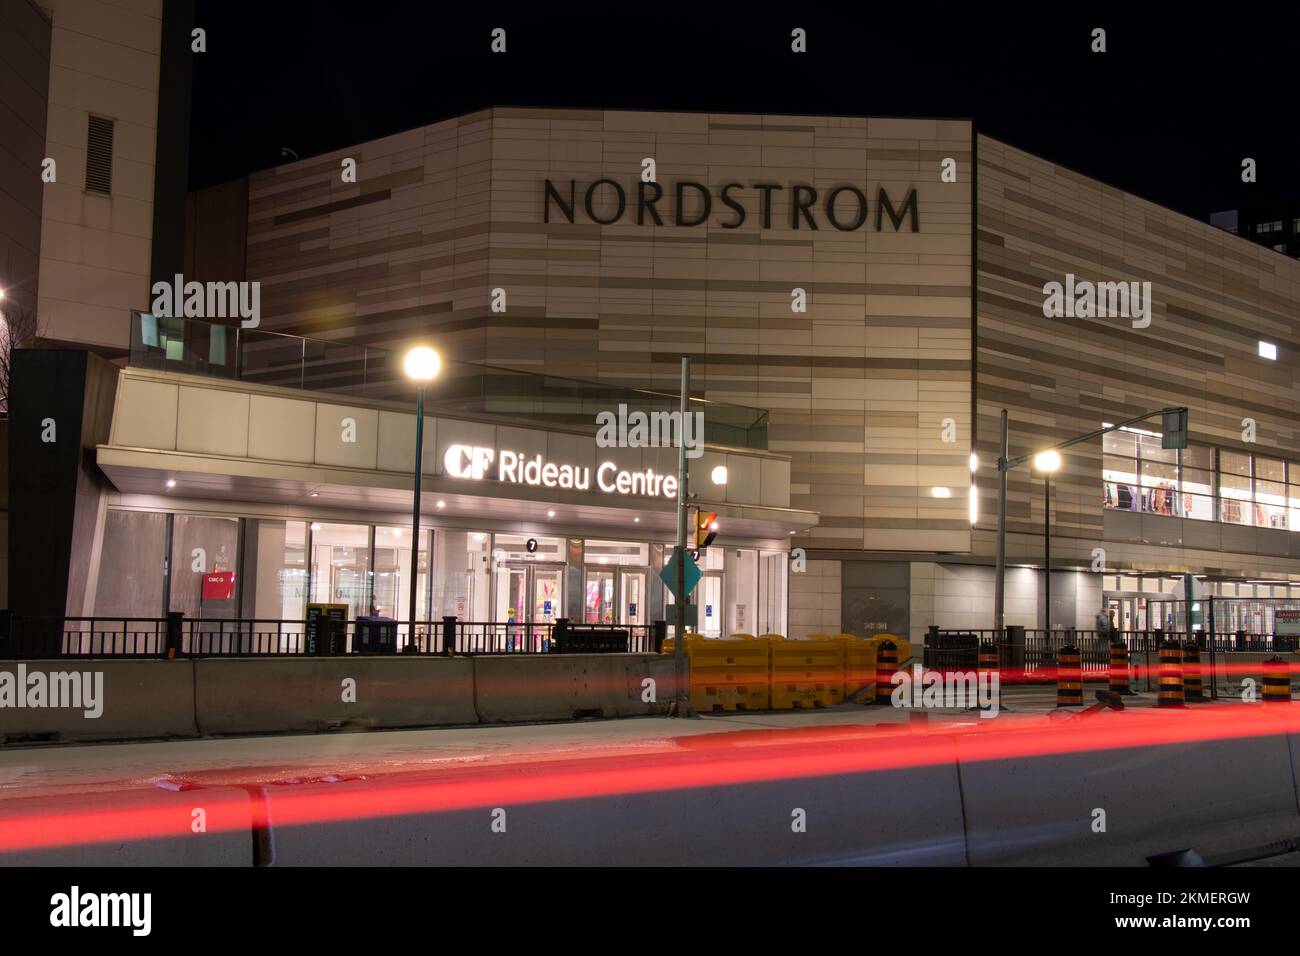 A sign for the CF Rideau Centre and Nordstrom retail store is seen as traffic passes by at night in downtown Ottawa. Stock Photo